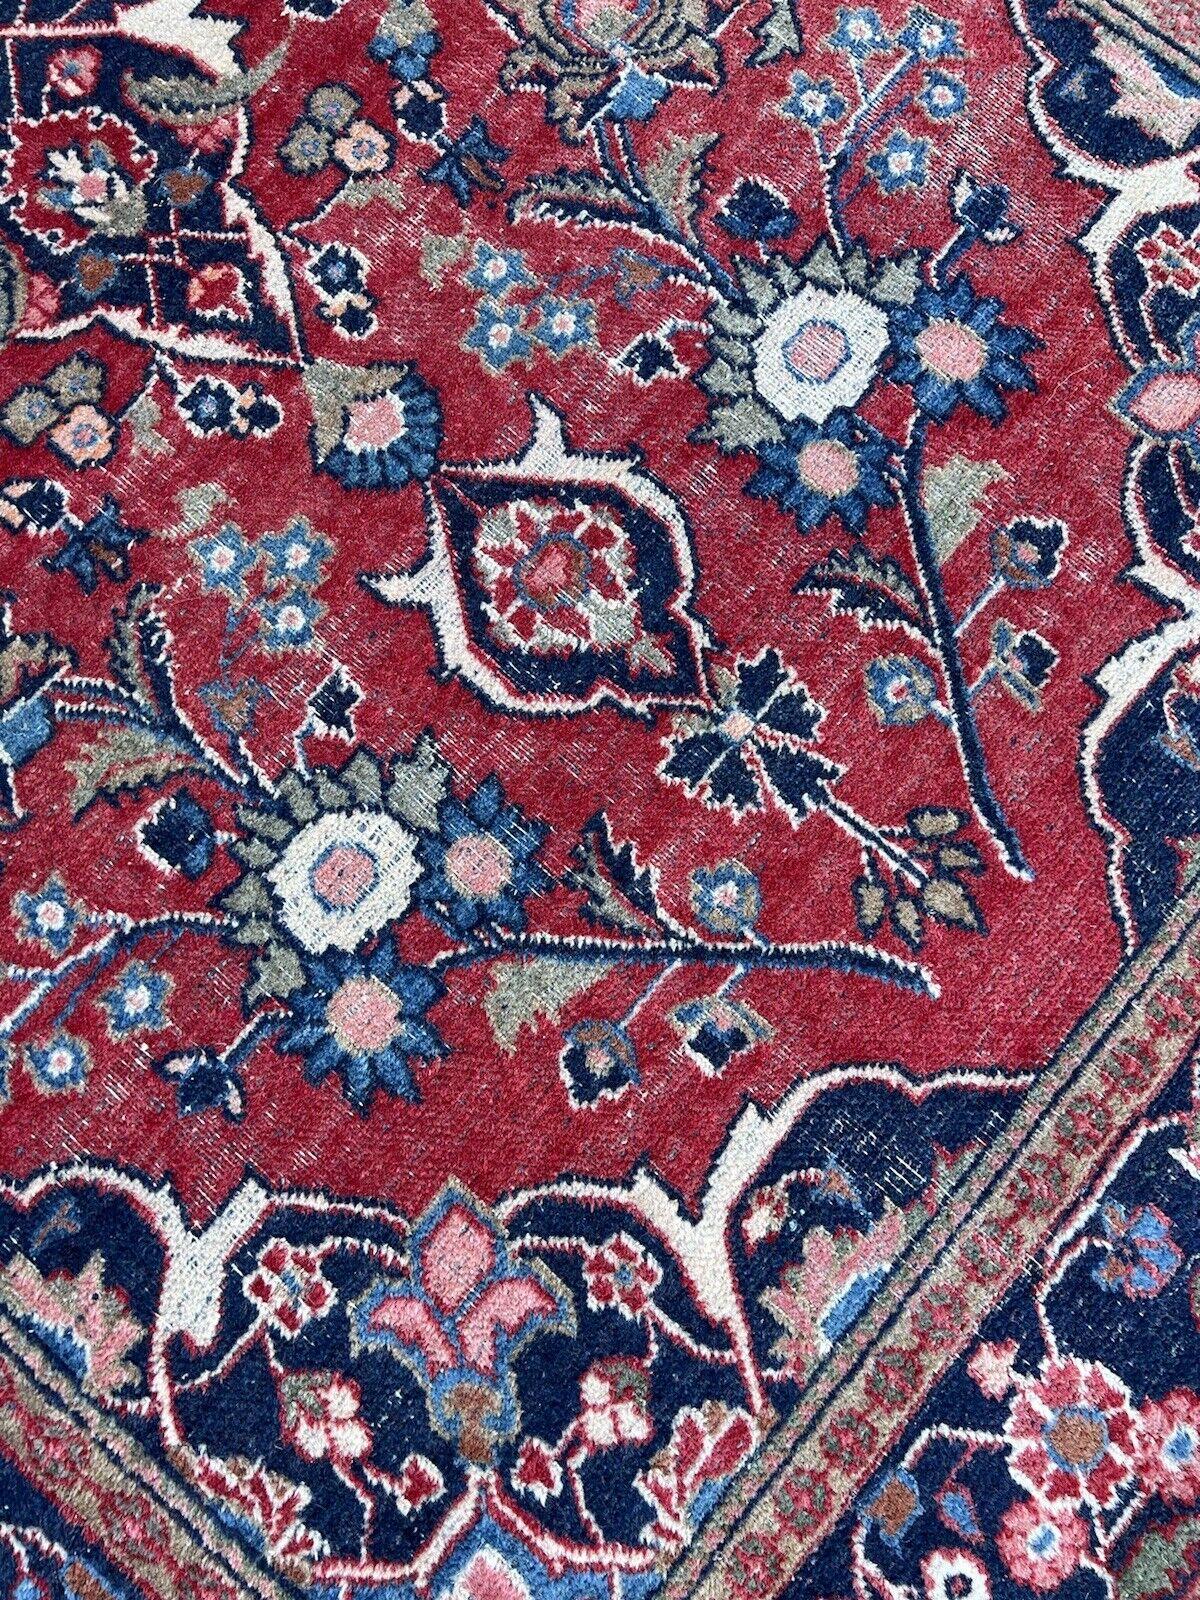 Handmade Antique Persian Style Kashan Rug 4.4' x 6.5', 1920s - 1S43 For Sale 6